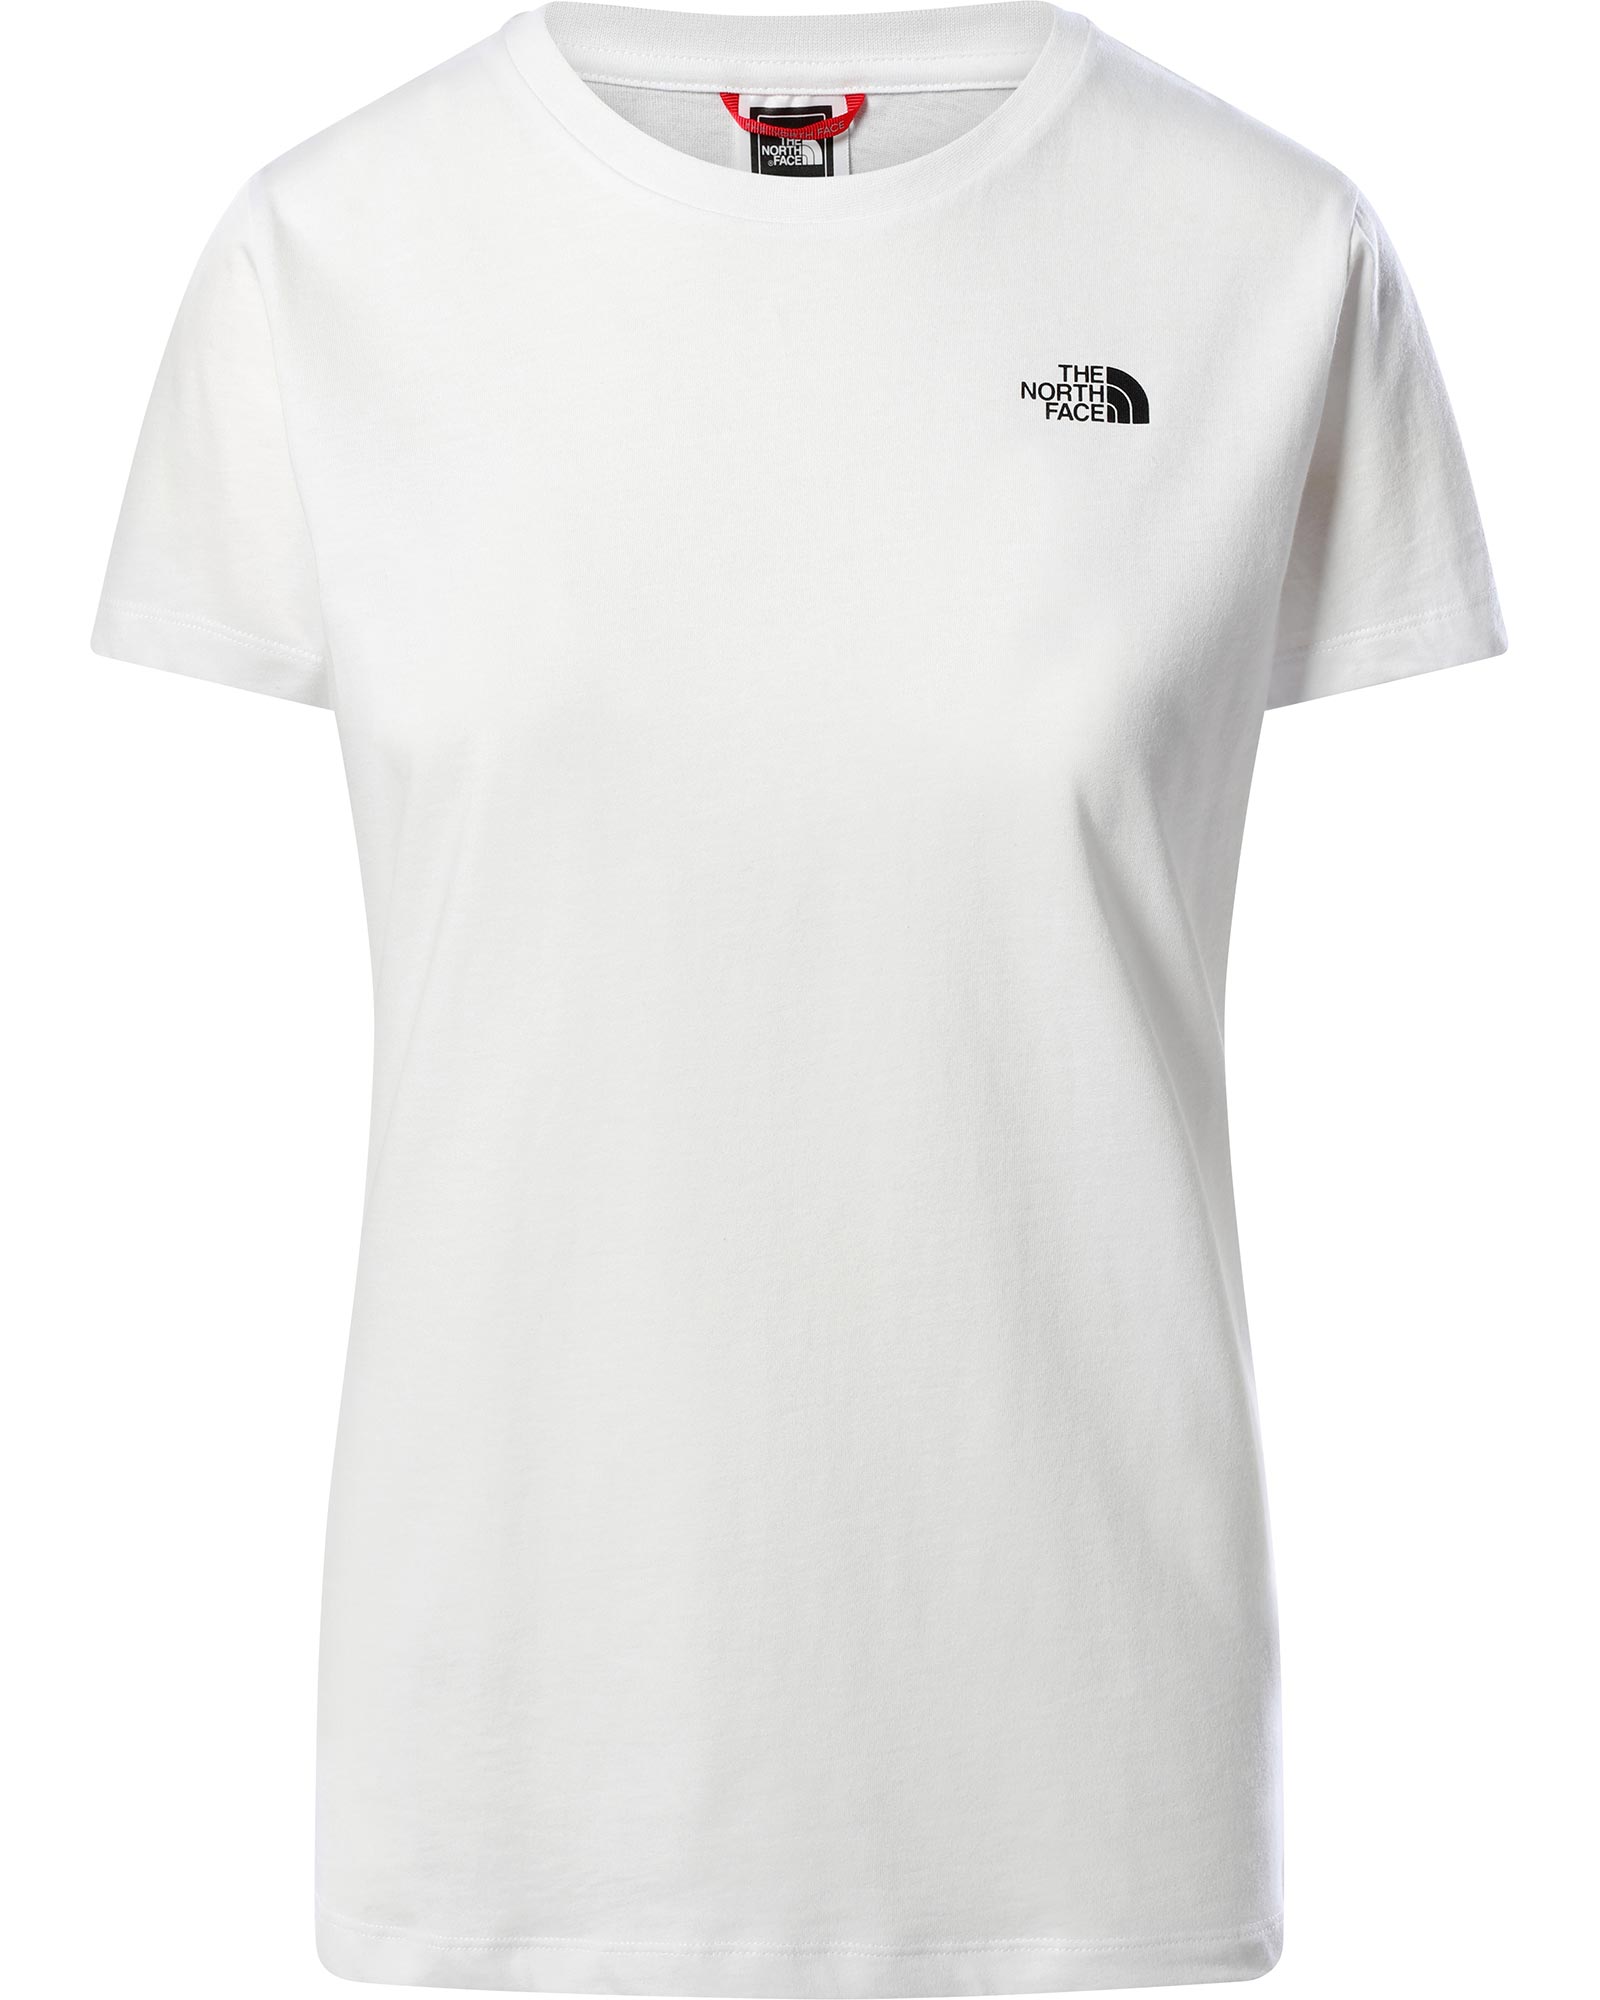 The North Face Simple Dome Women’s T Shirt - TNF White S